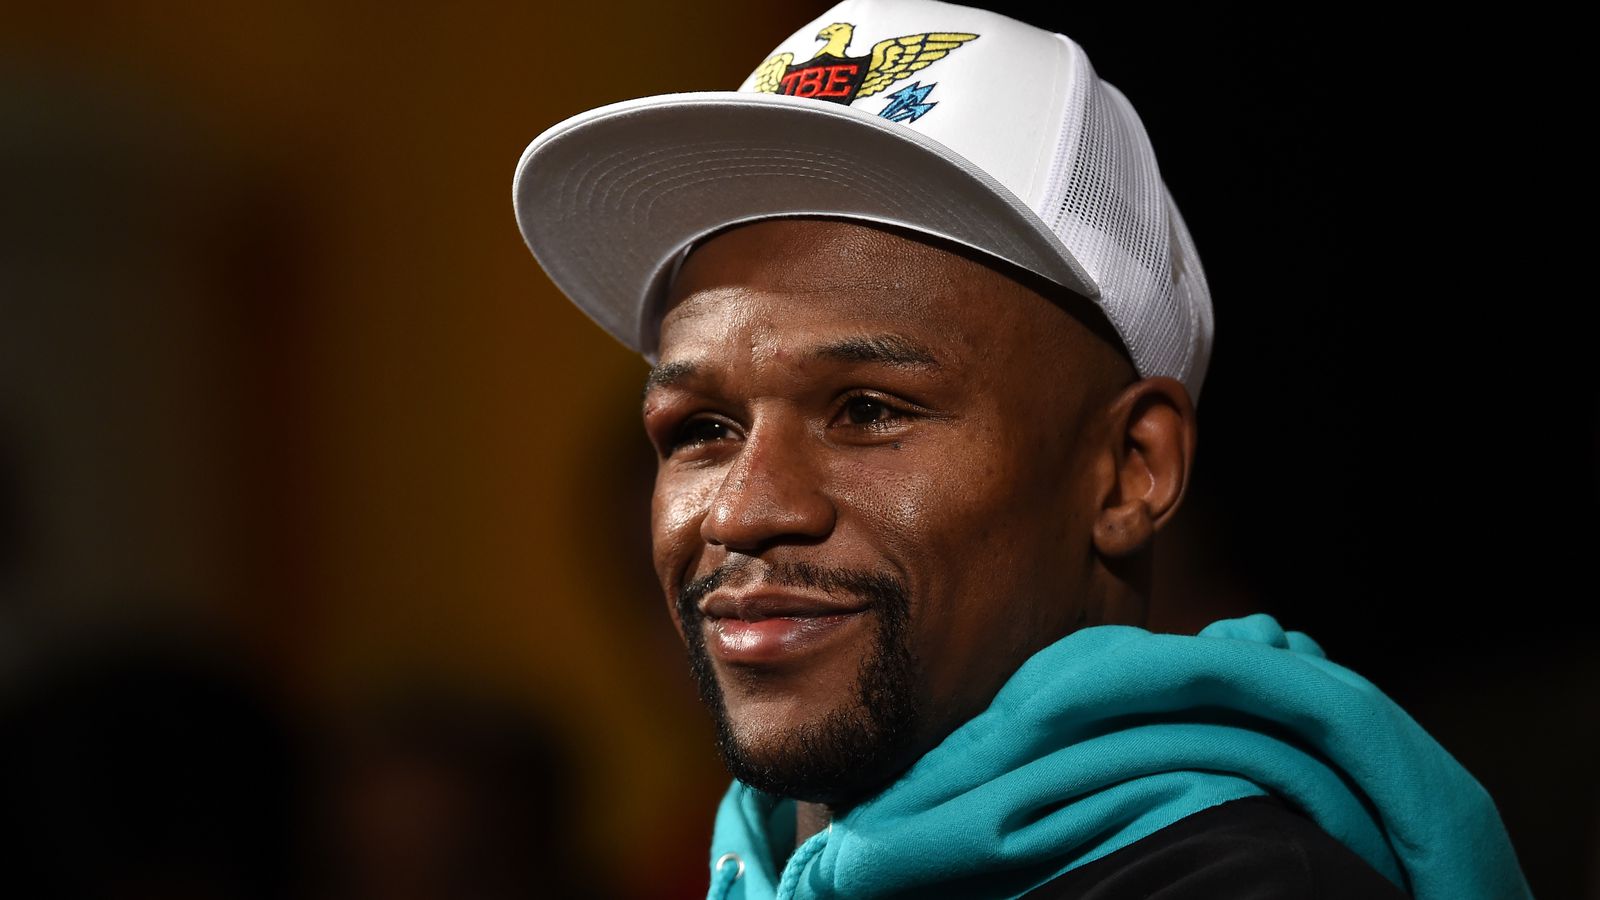 Floyd Mayweather Spends Over $1 Million On Super Bowl Suite For Himself And 34 Friends